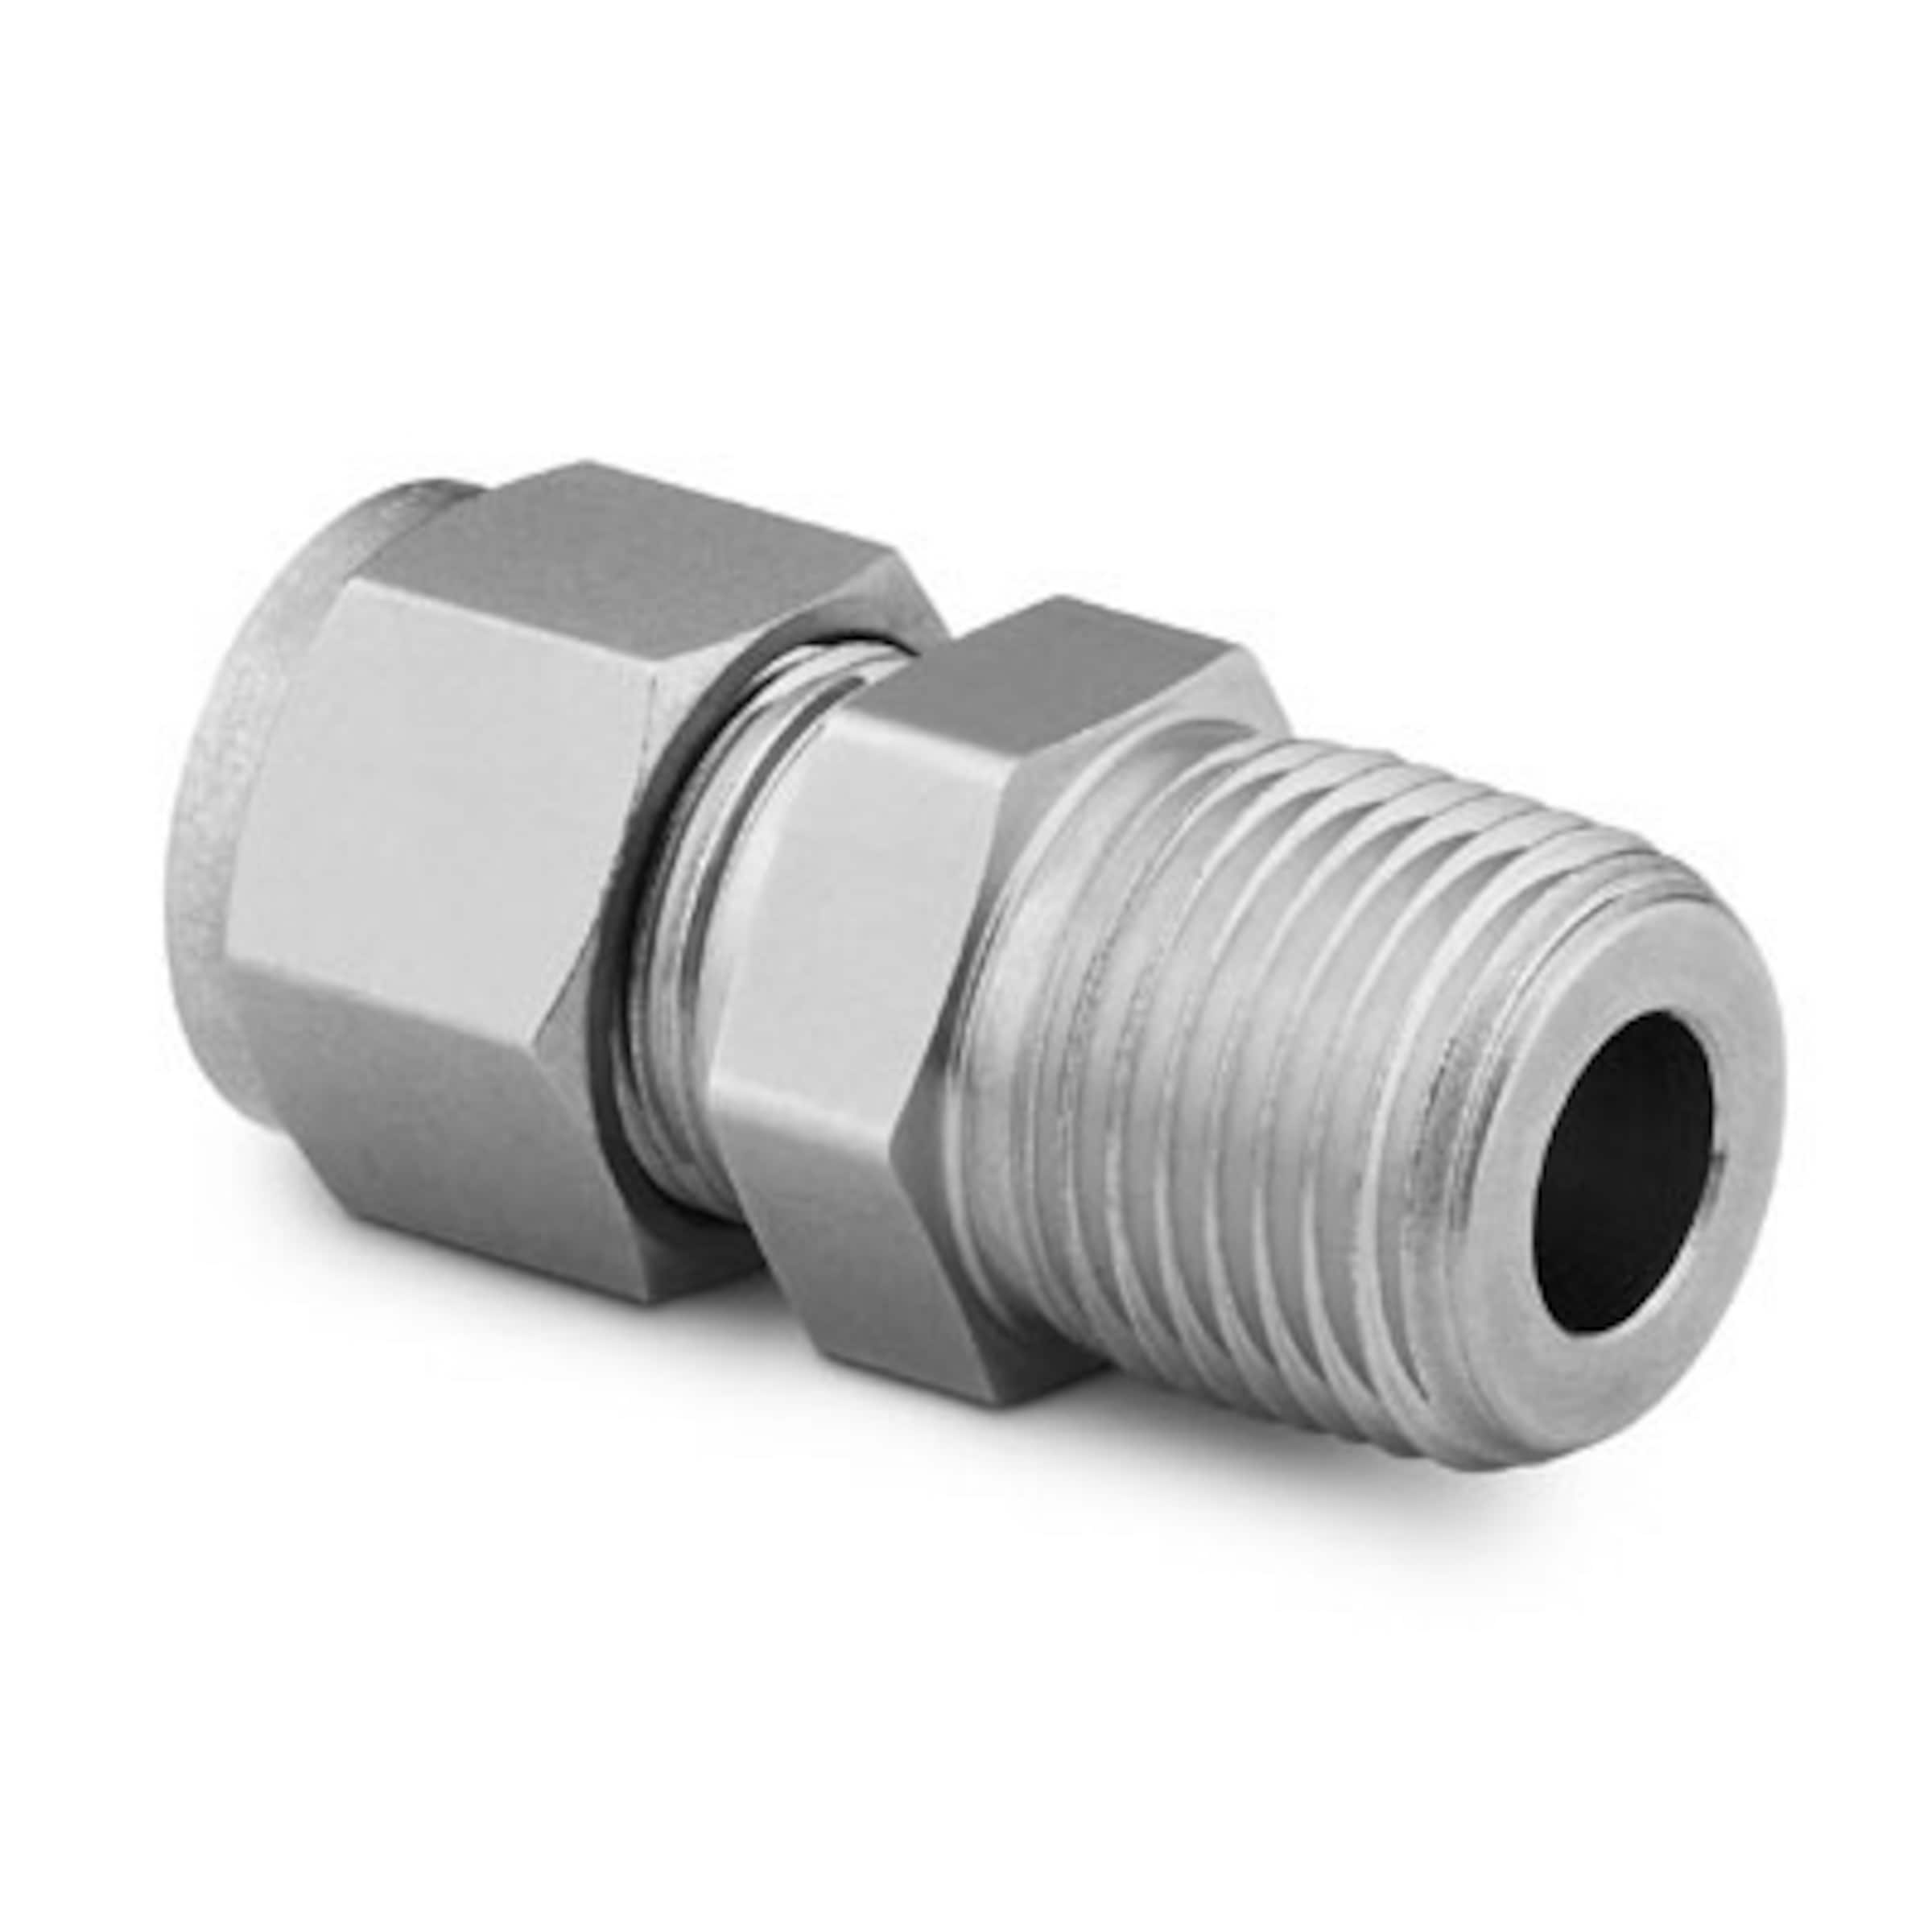 Alloy 400/R-405 Swagelok Tube Fitting, Male Connector, 3/8 in. Tube OD ...